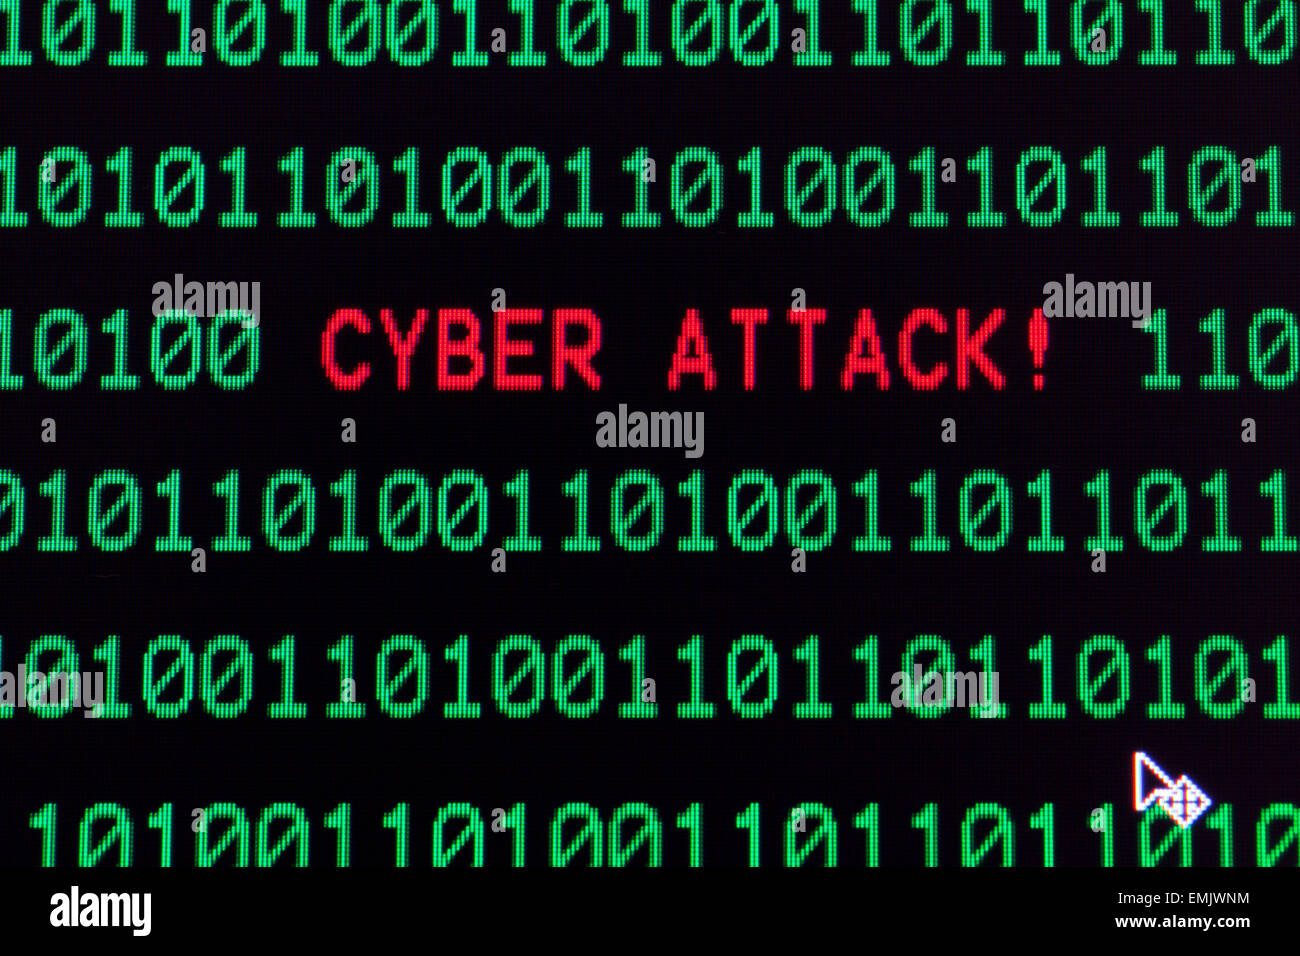 Cyber attack message on computer screen Stock Photo